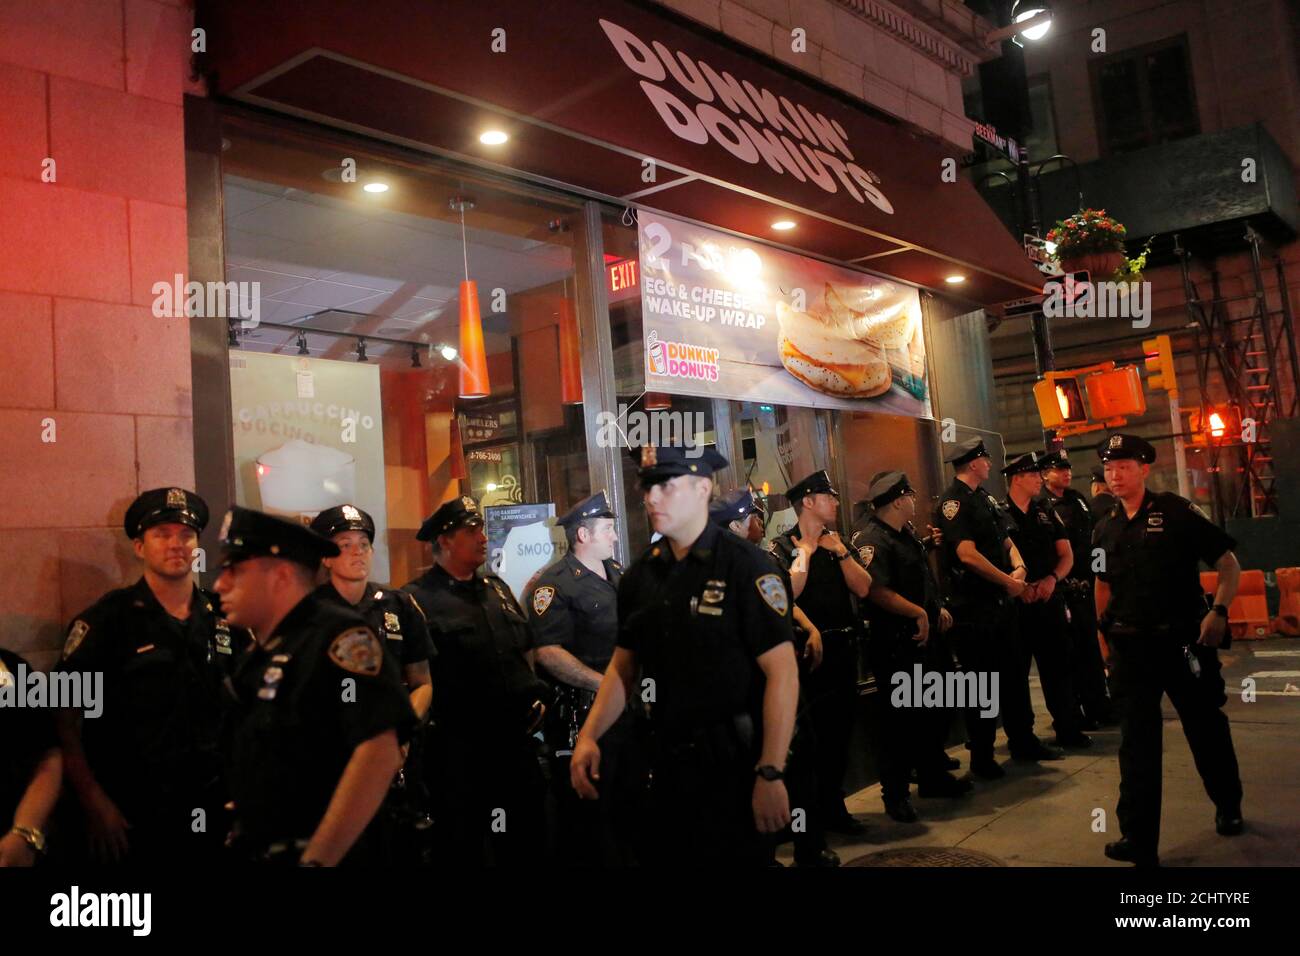 Police stand outside a Dunkin' Donuts shop during a Black Lives Matter protest near City Hall in Manhattan, New York, U.S., August 1, 2016.  REUTERS/Andrew Kelly Stock Photo